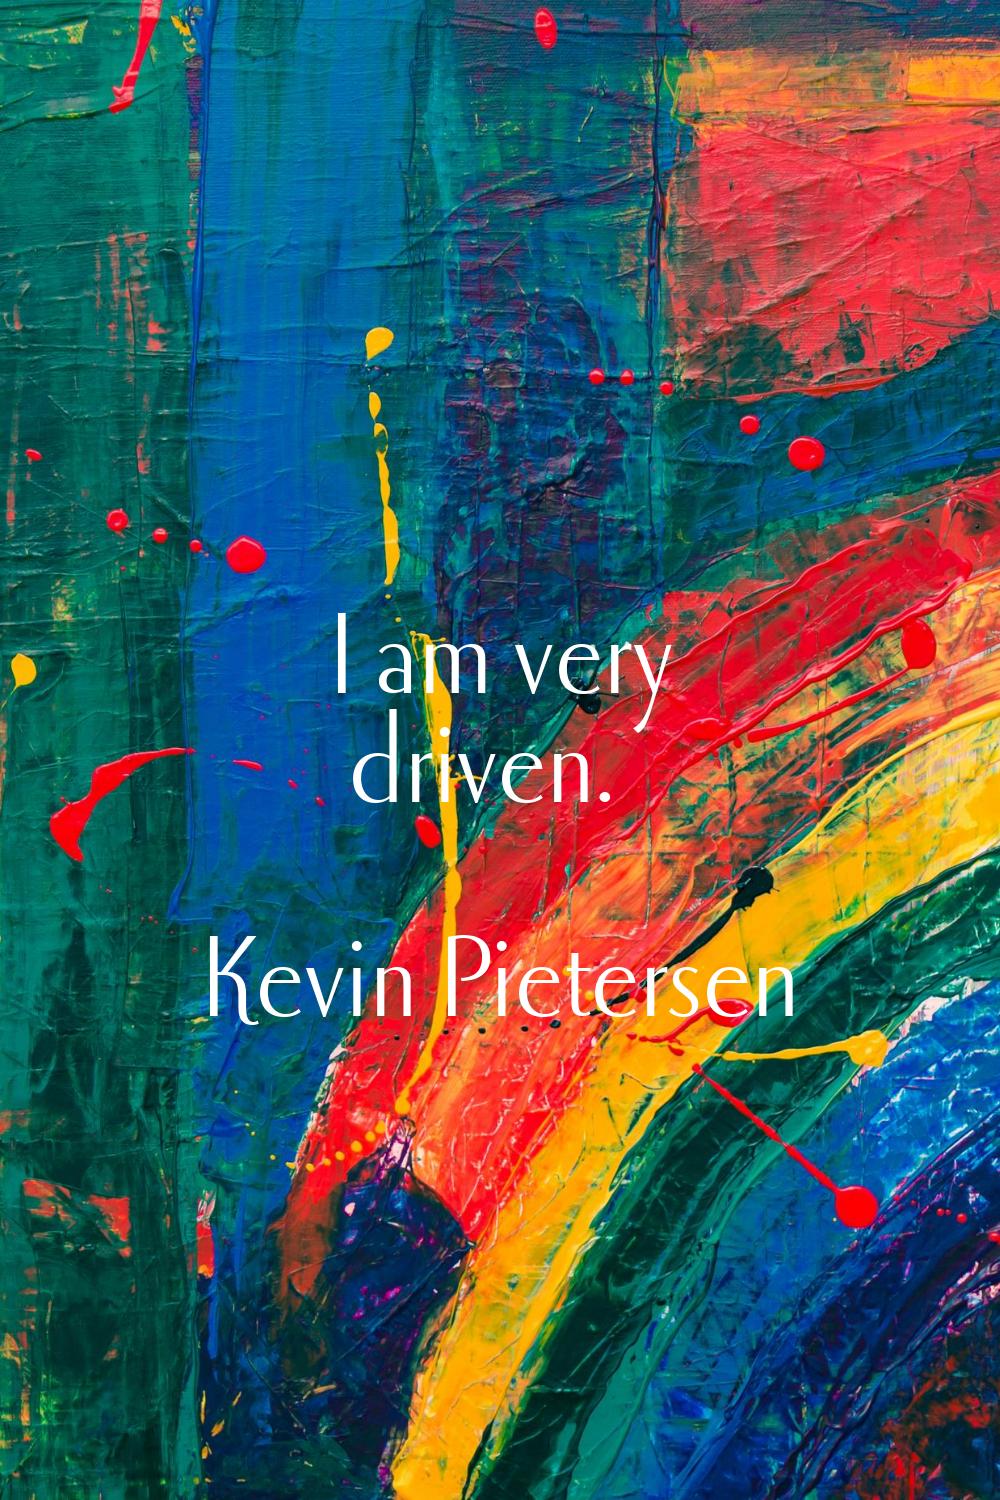 I am very driven.